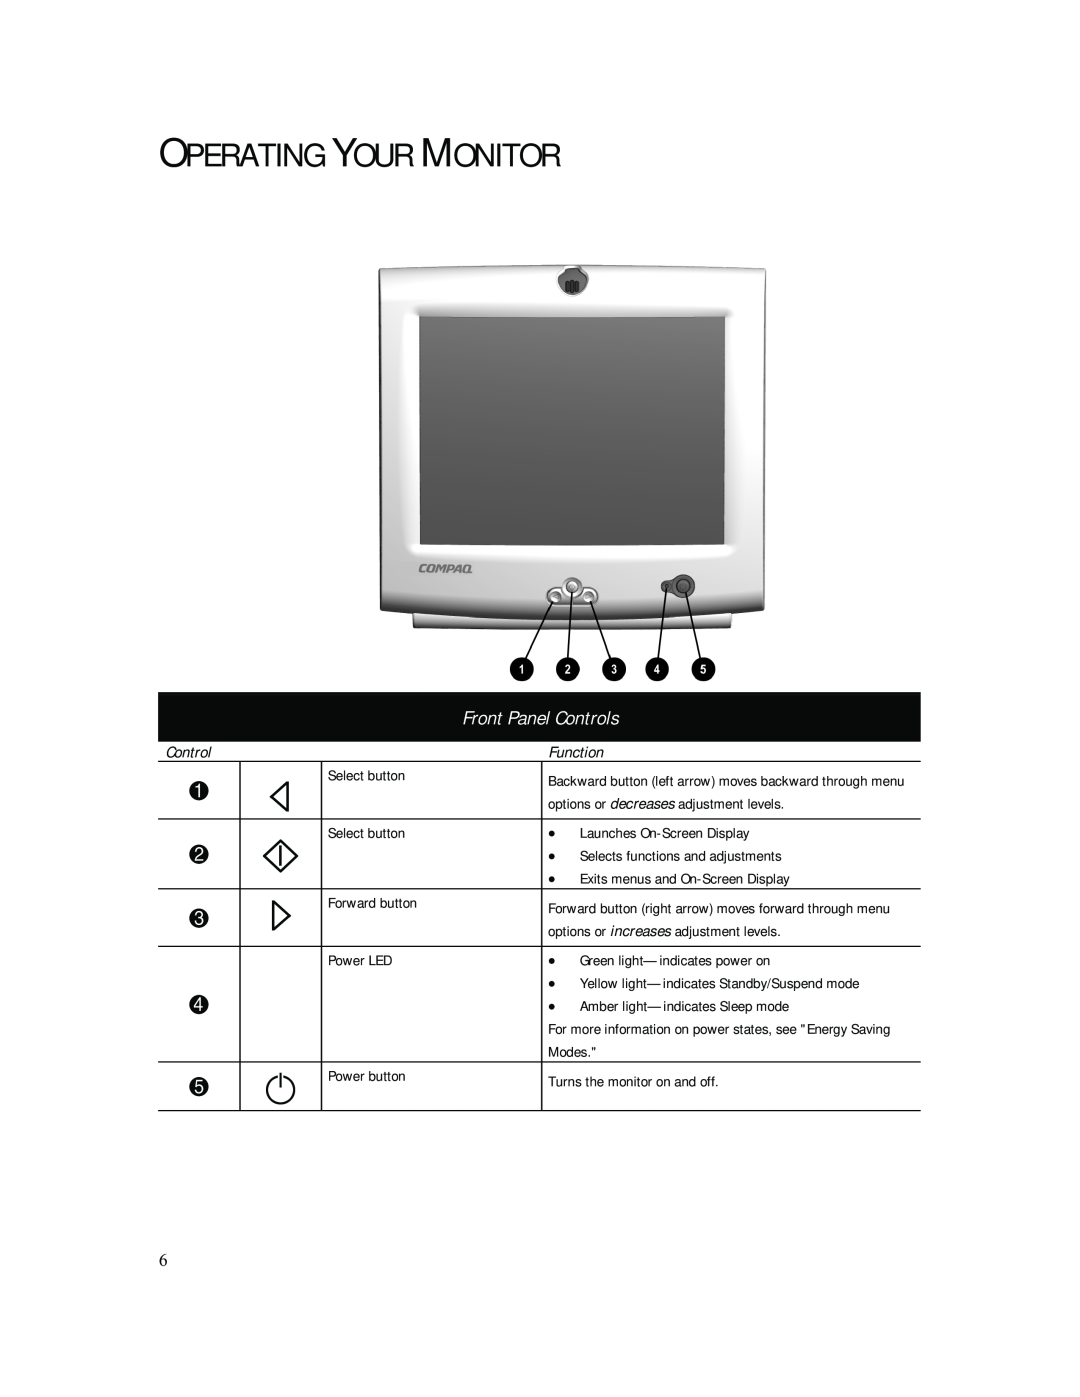 Compaq 740 manual Operating Your Monitor, Front Panel Controls 